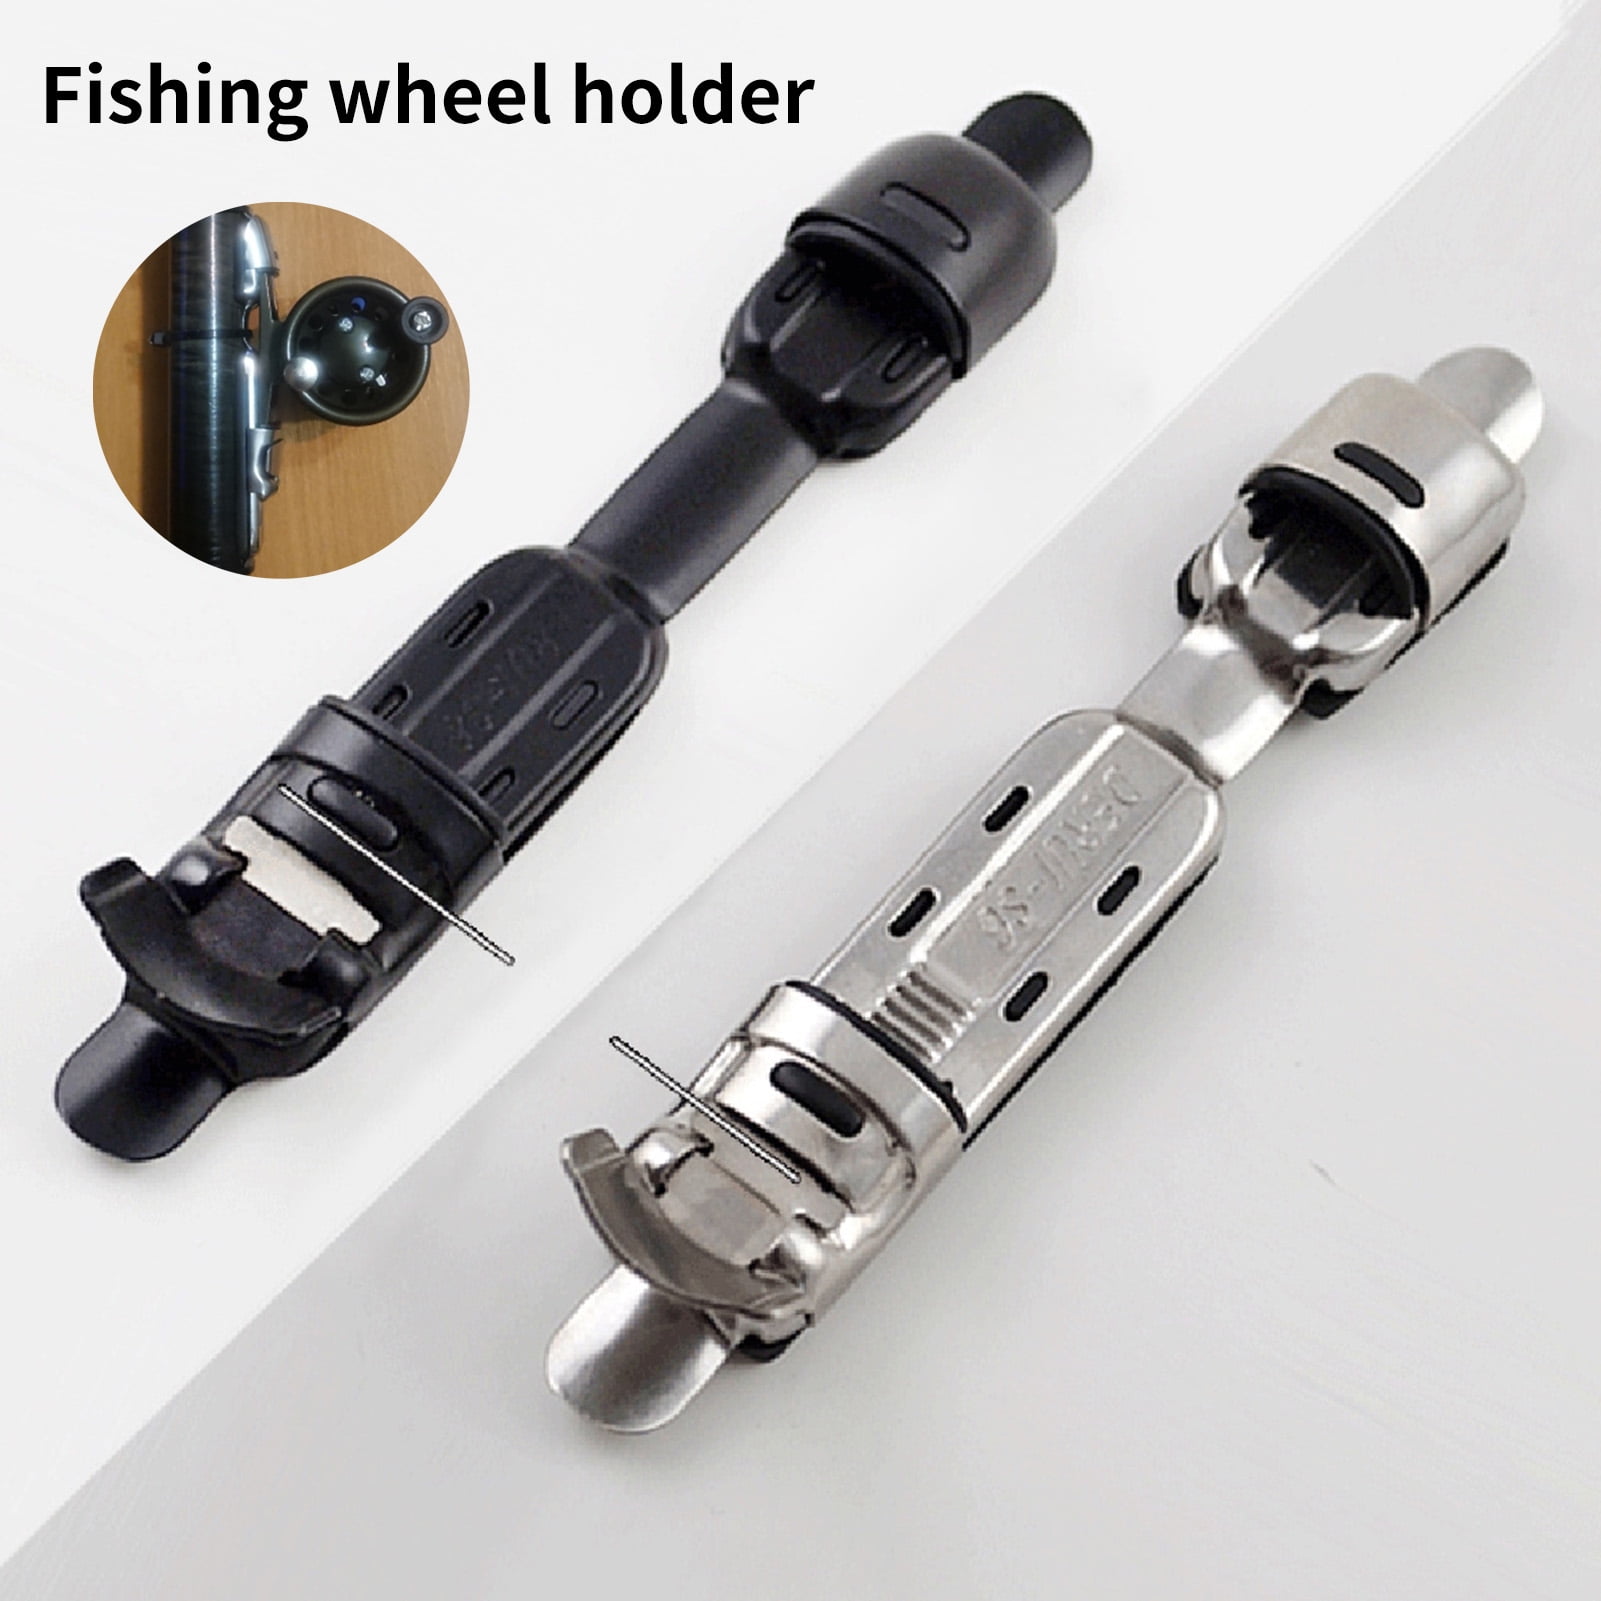 New Practical Reel Holder Fishing Rod For Seat Plate Functional Handle Reel  Building Fishing Reel Professional - AliExpress